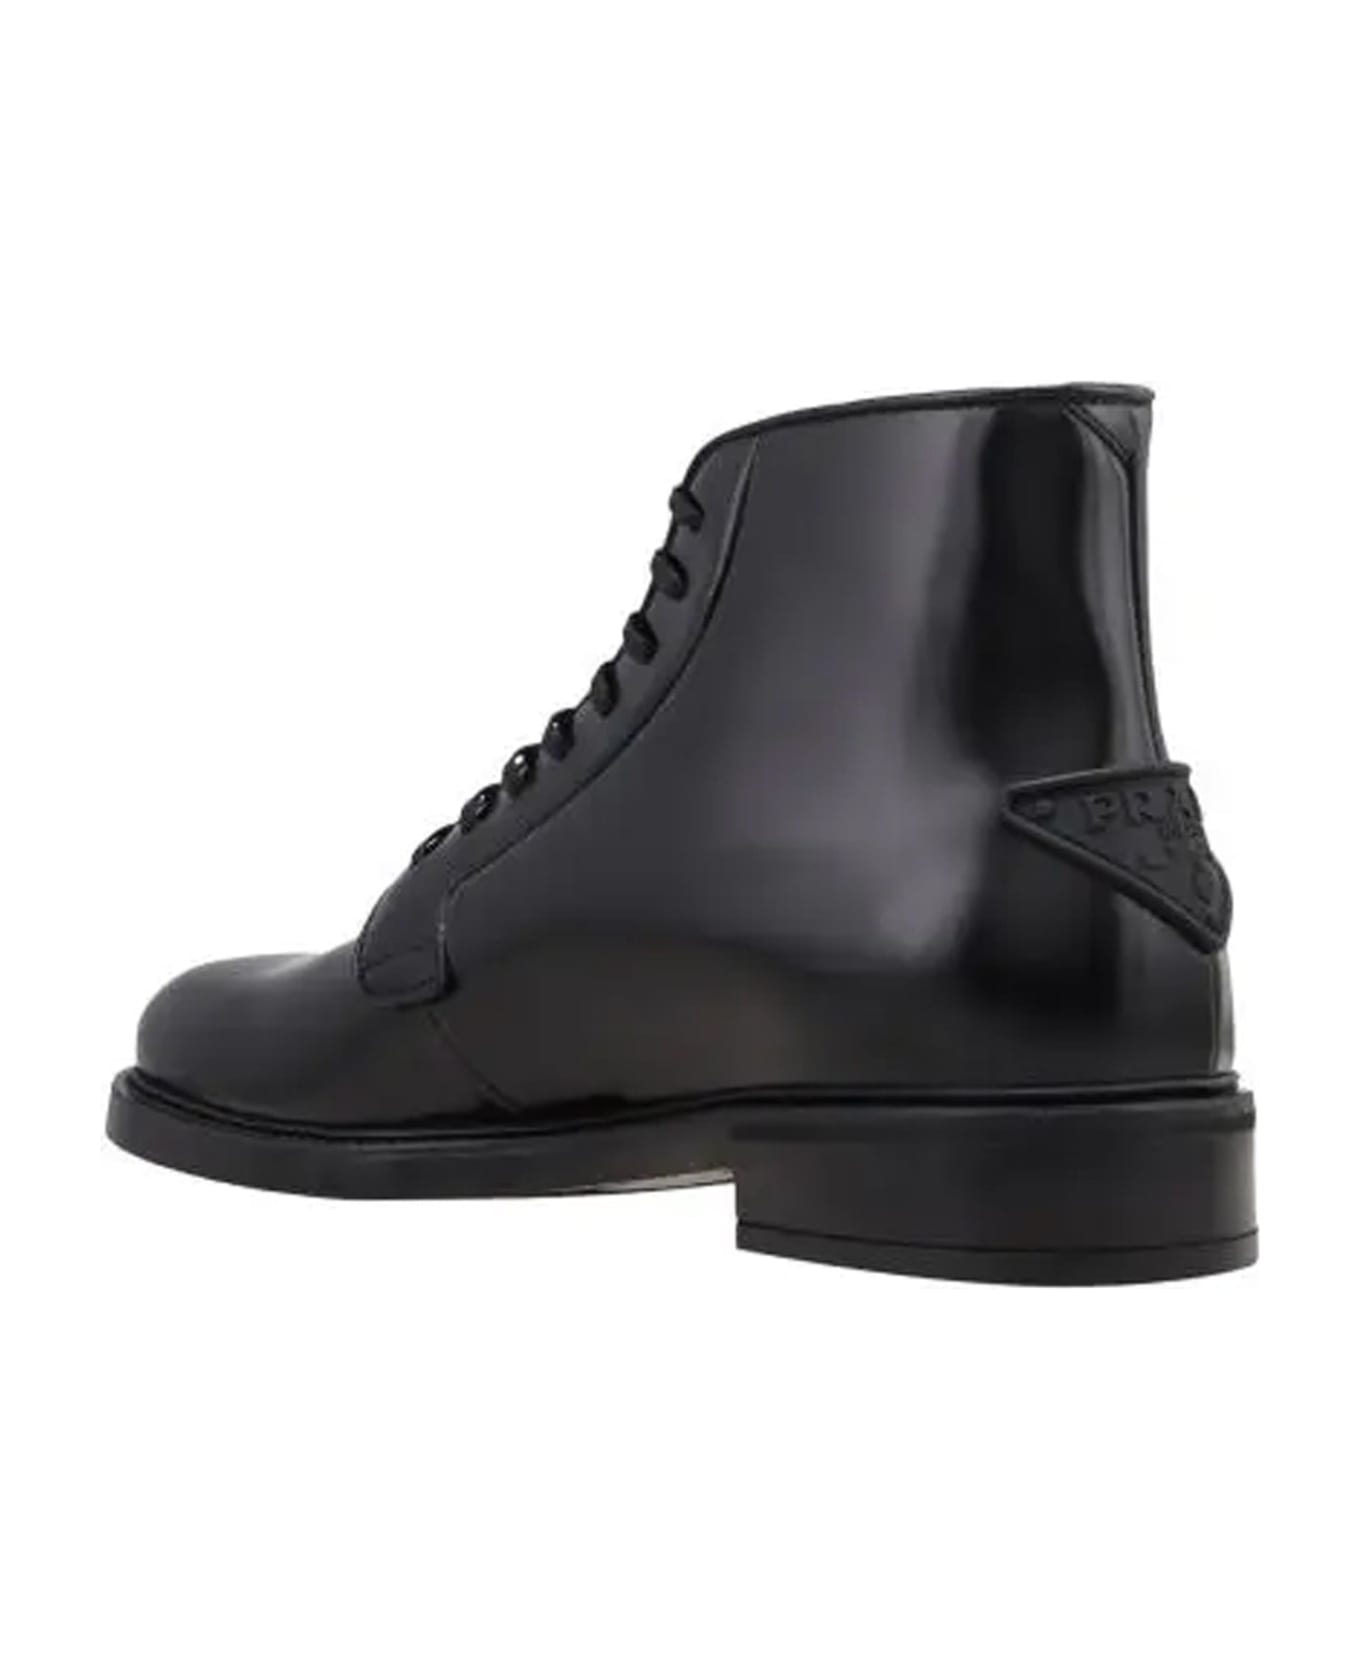 Prada Leather Lace-up Boots - Black ブーツ